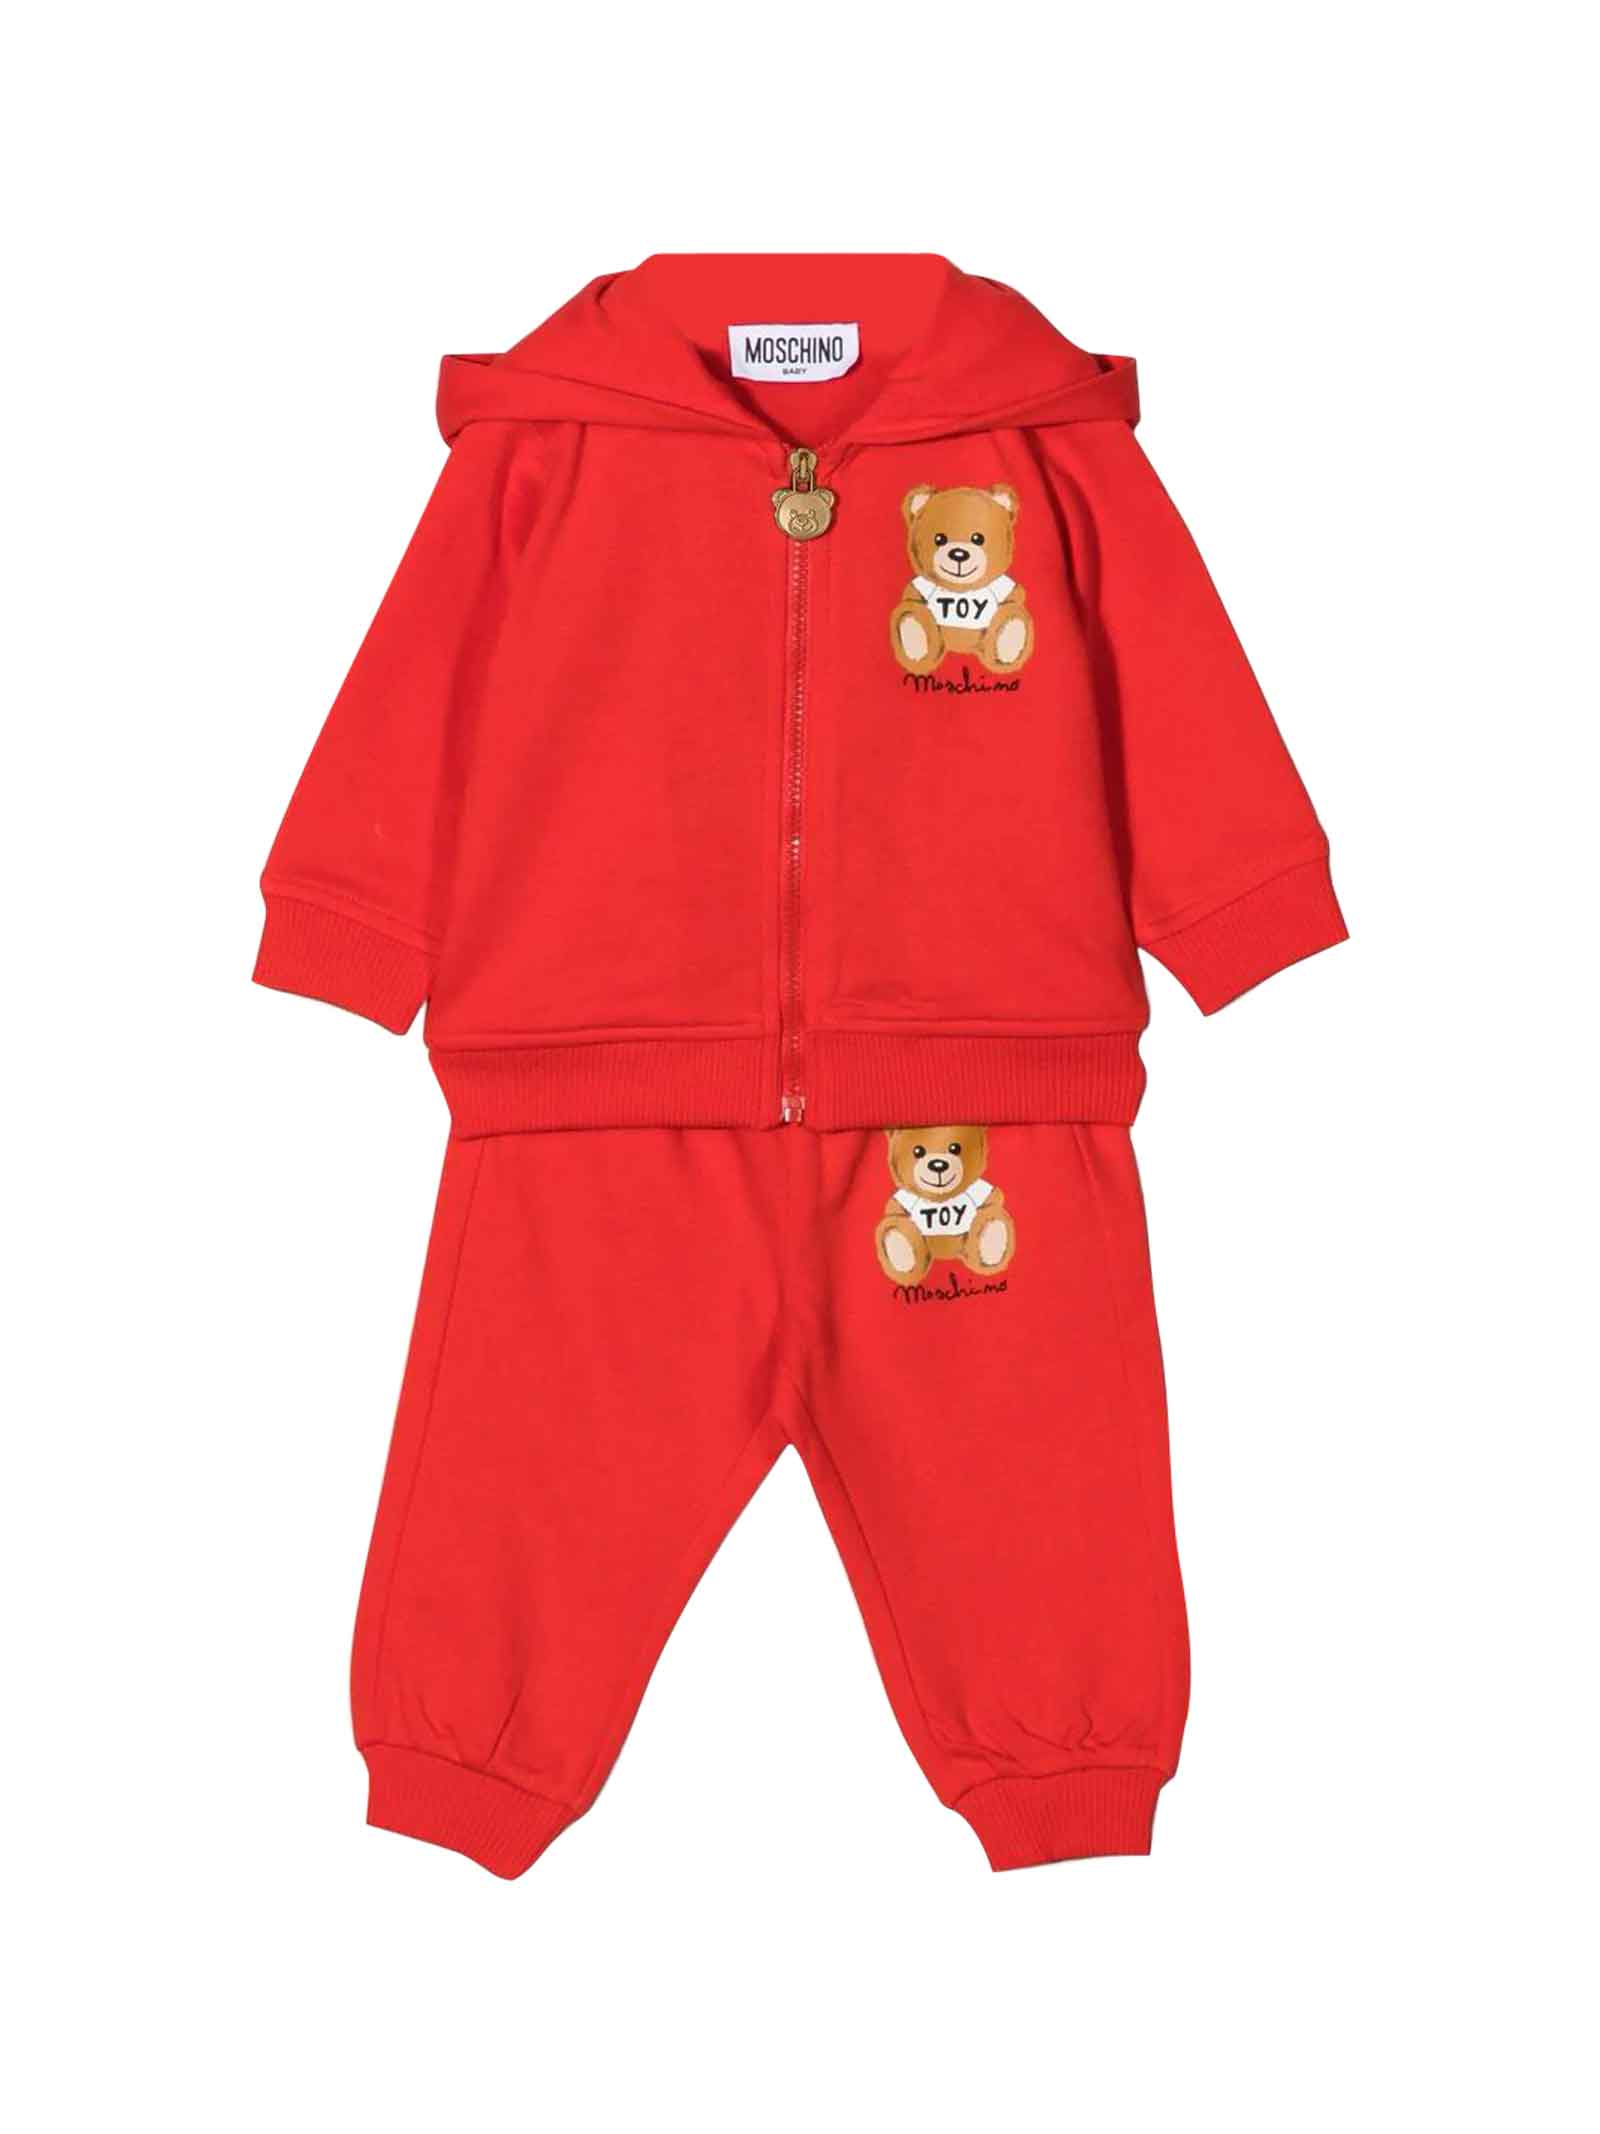 Moschino Red Jumpsuit Baby Unisex